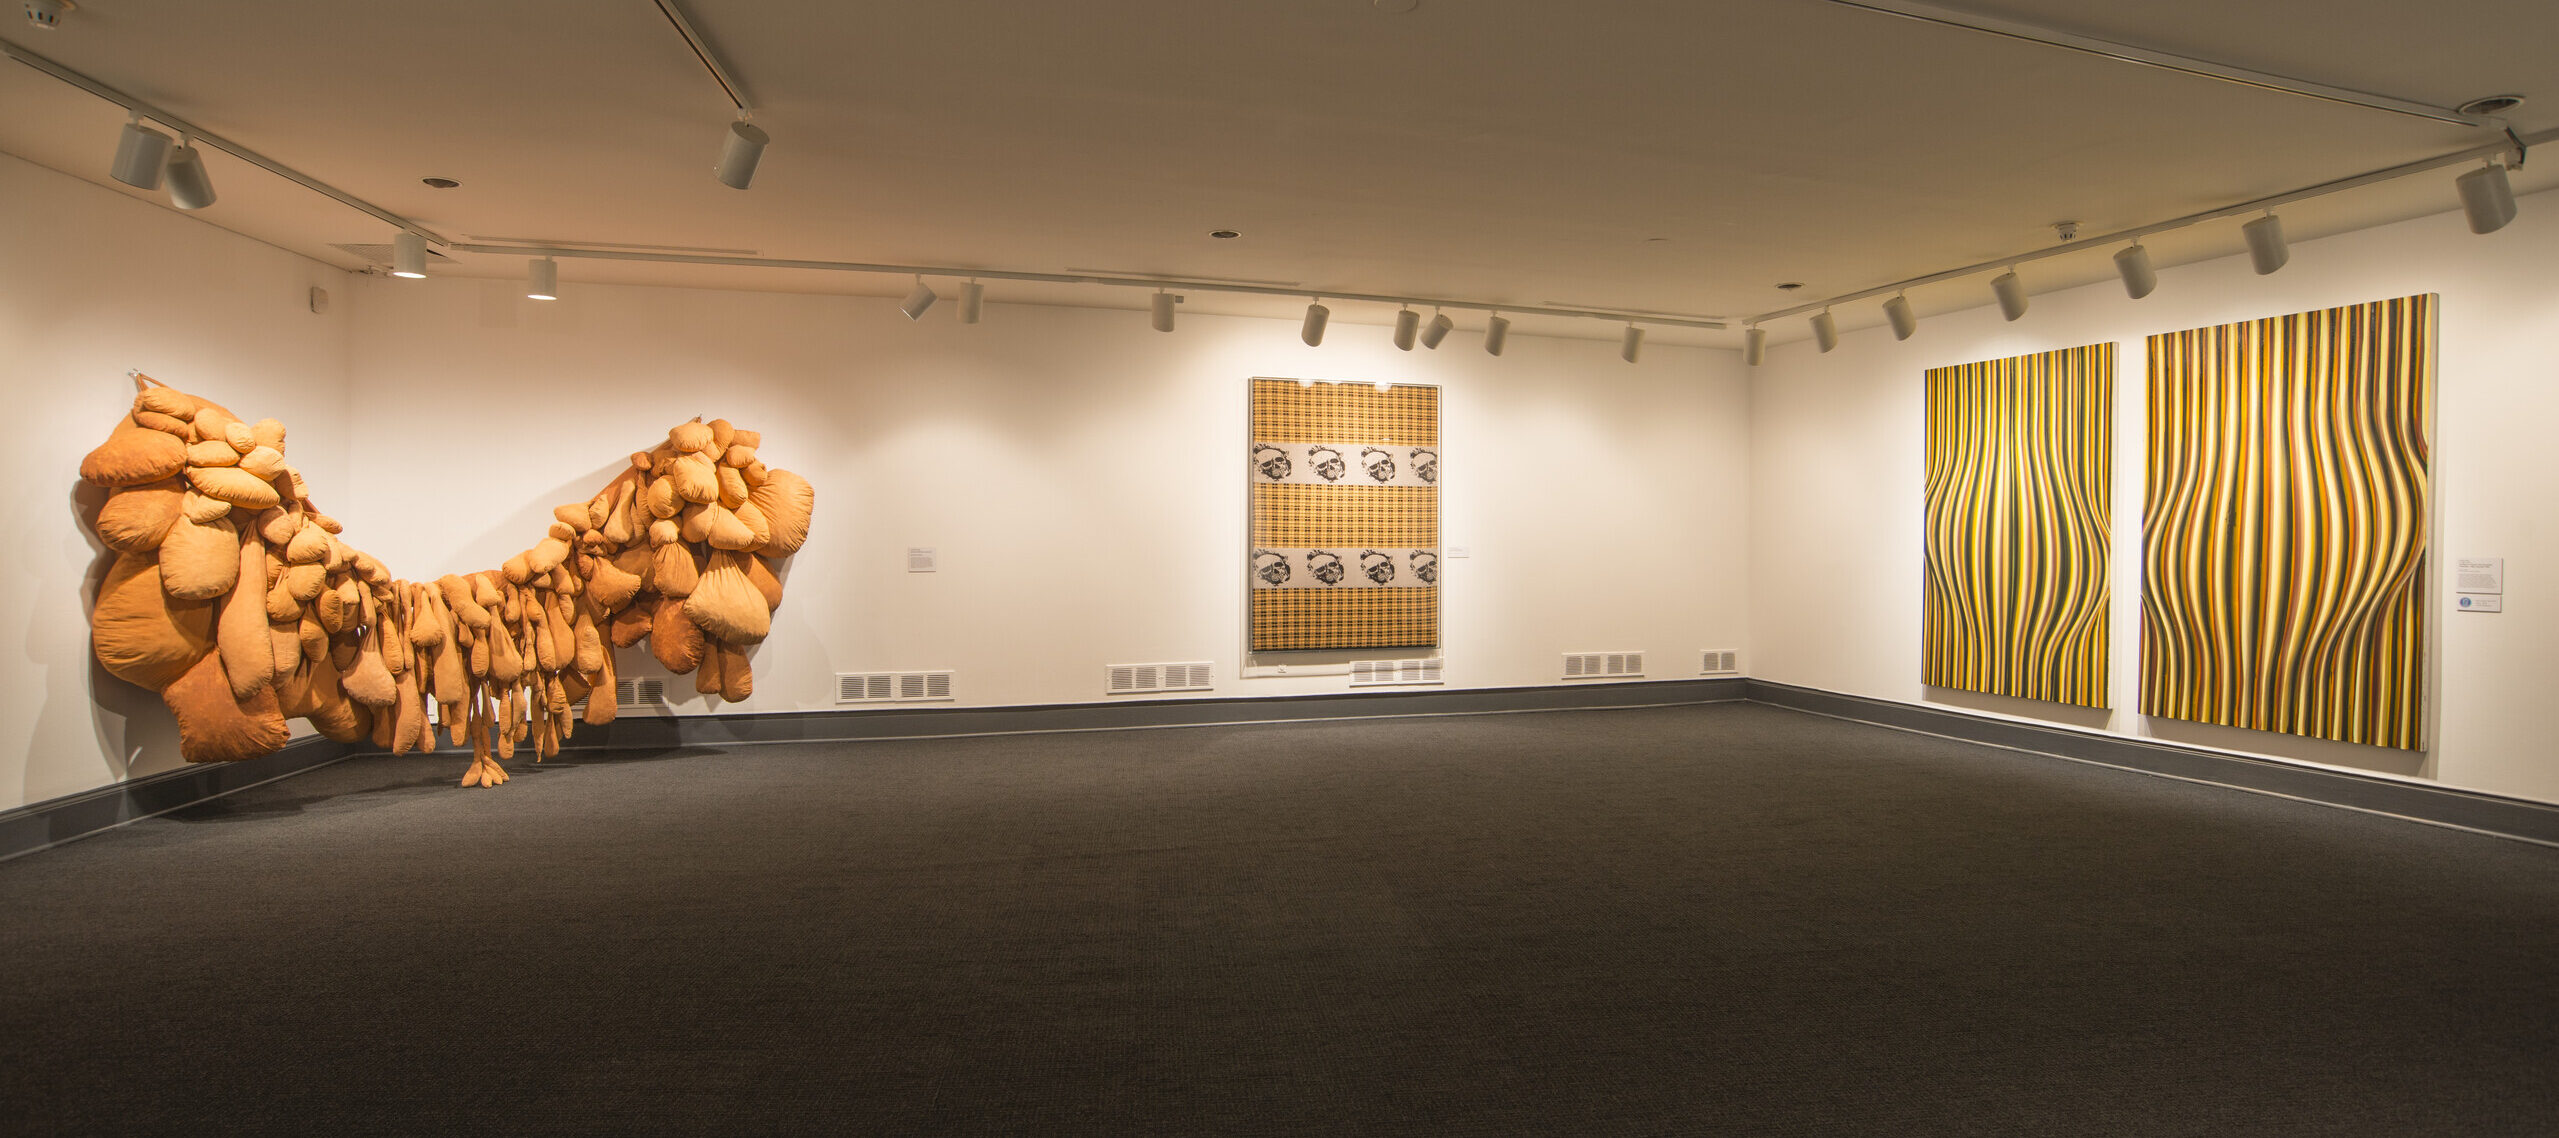 An installation view of a gallery space with white walls and a gray floor. There are several art pieces hanging on the walls. On the left, a huge textile piece made of several bags in an orange fabric takes up a big part of the room. Another art piece shows skulls on an orange checkered background. On the right wall is an abstract art piece made of several orange, white, and black stripes that causes an optical illusion.